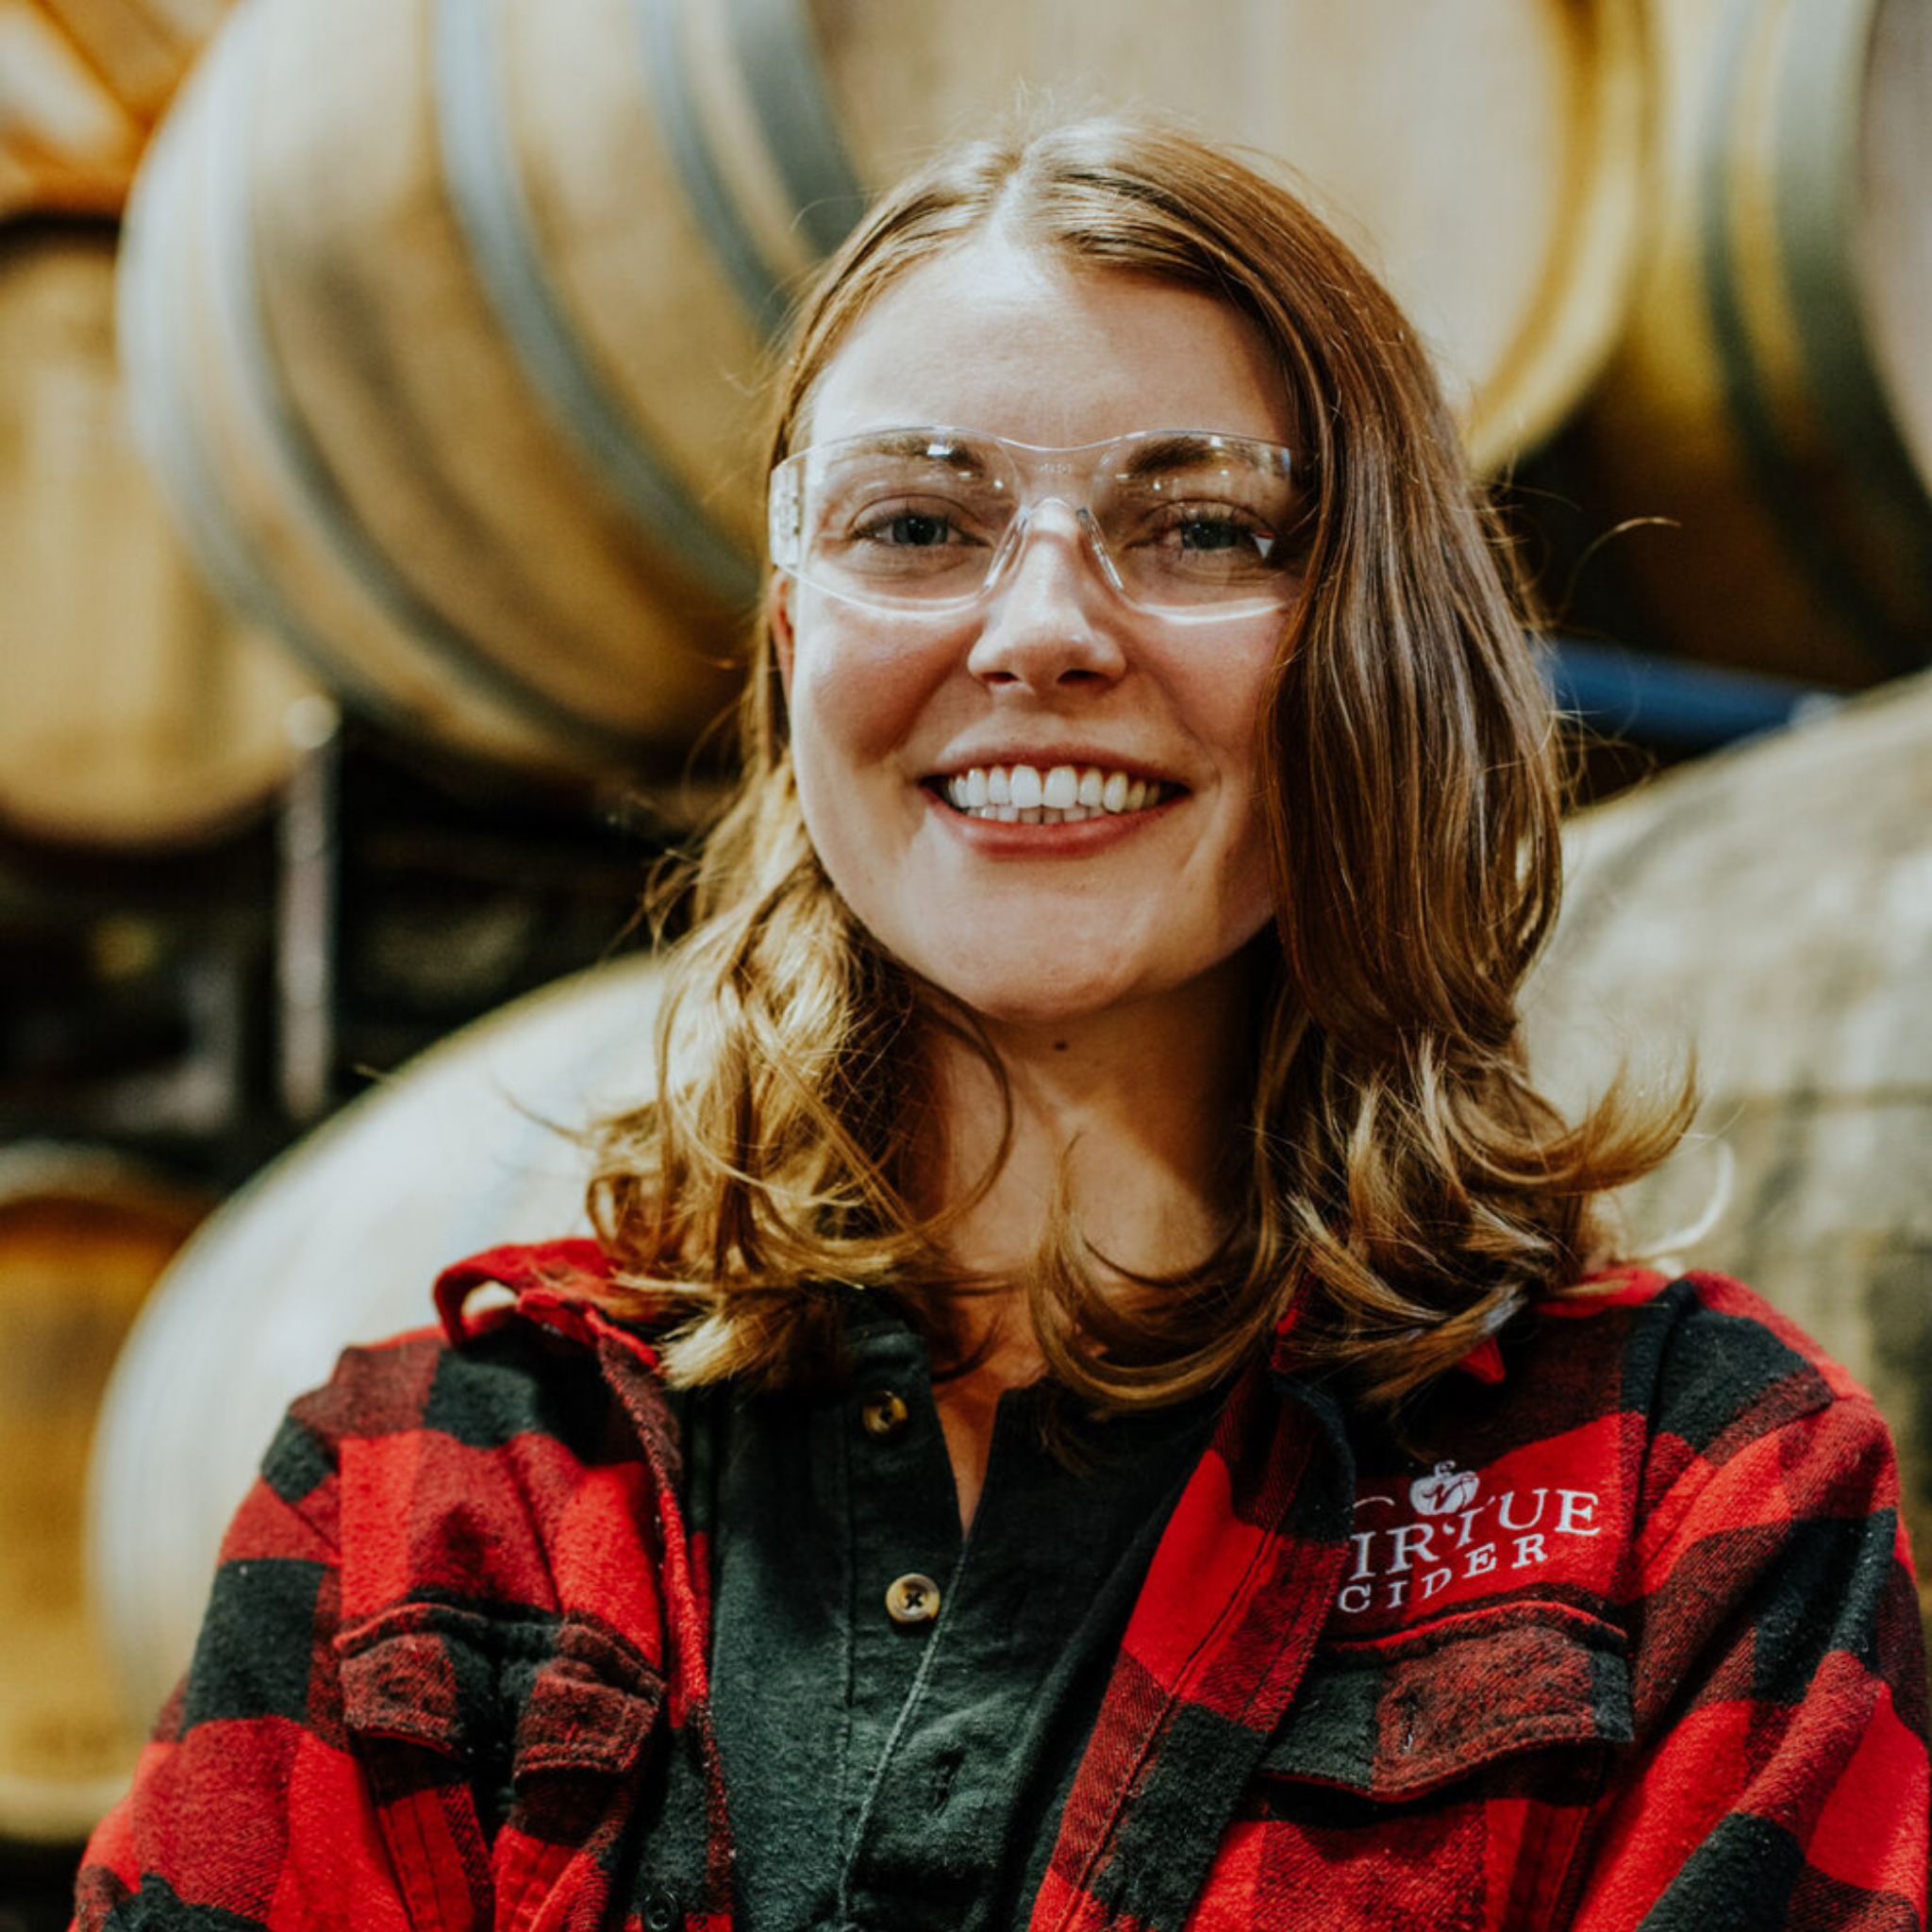 IN CELEBRATION OF THE WOMEN OF VIRTUE CIDER